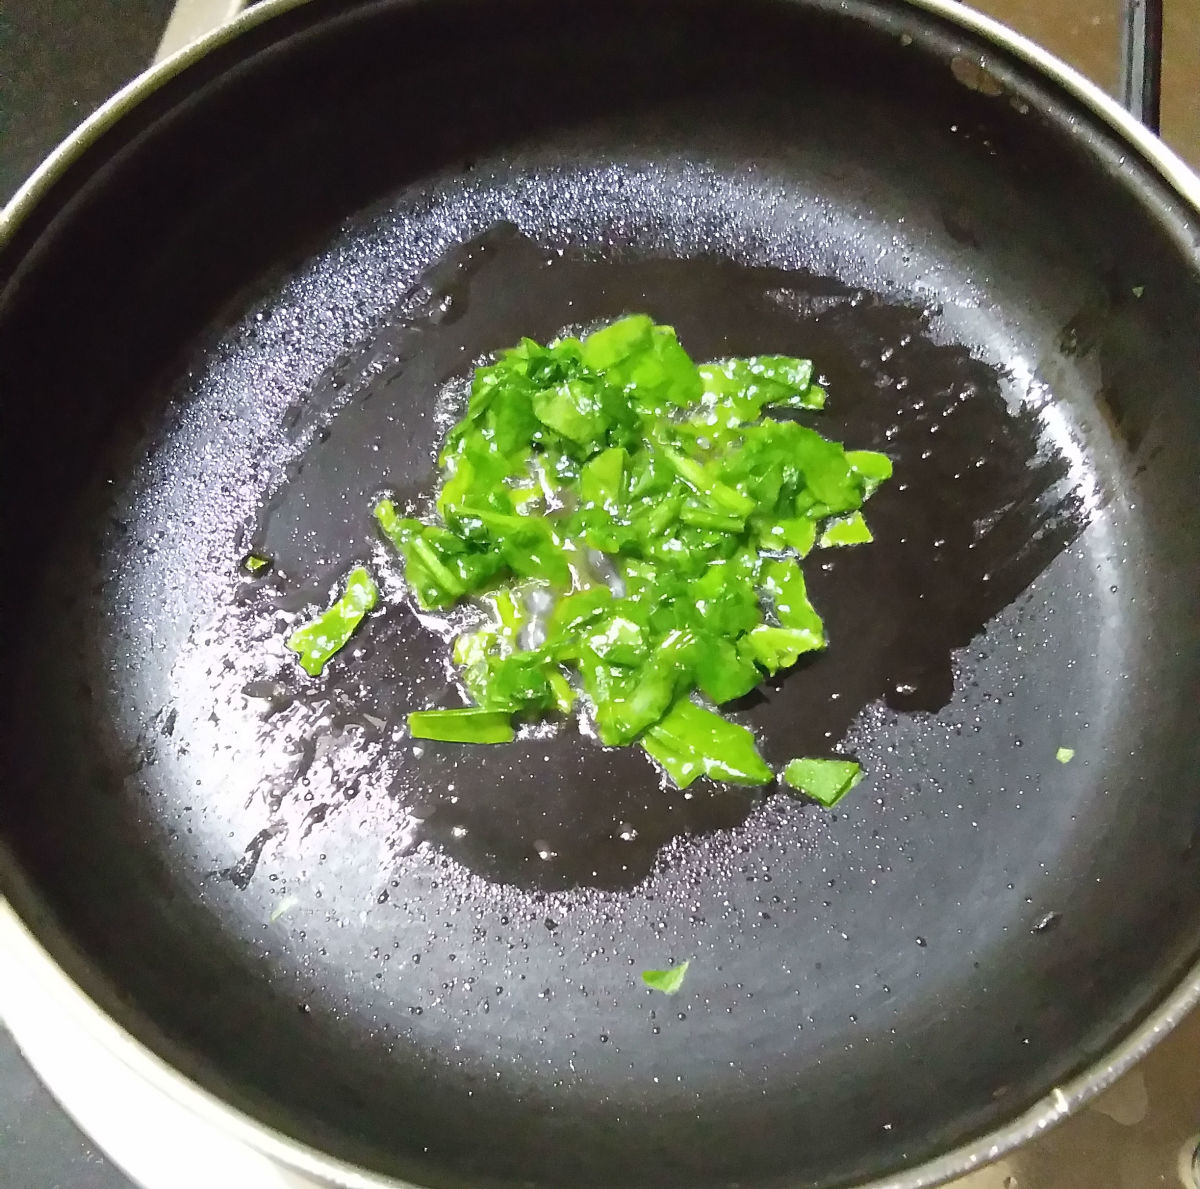 Step two: Sauté the chopped spinach in butter till it becomes crispy.